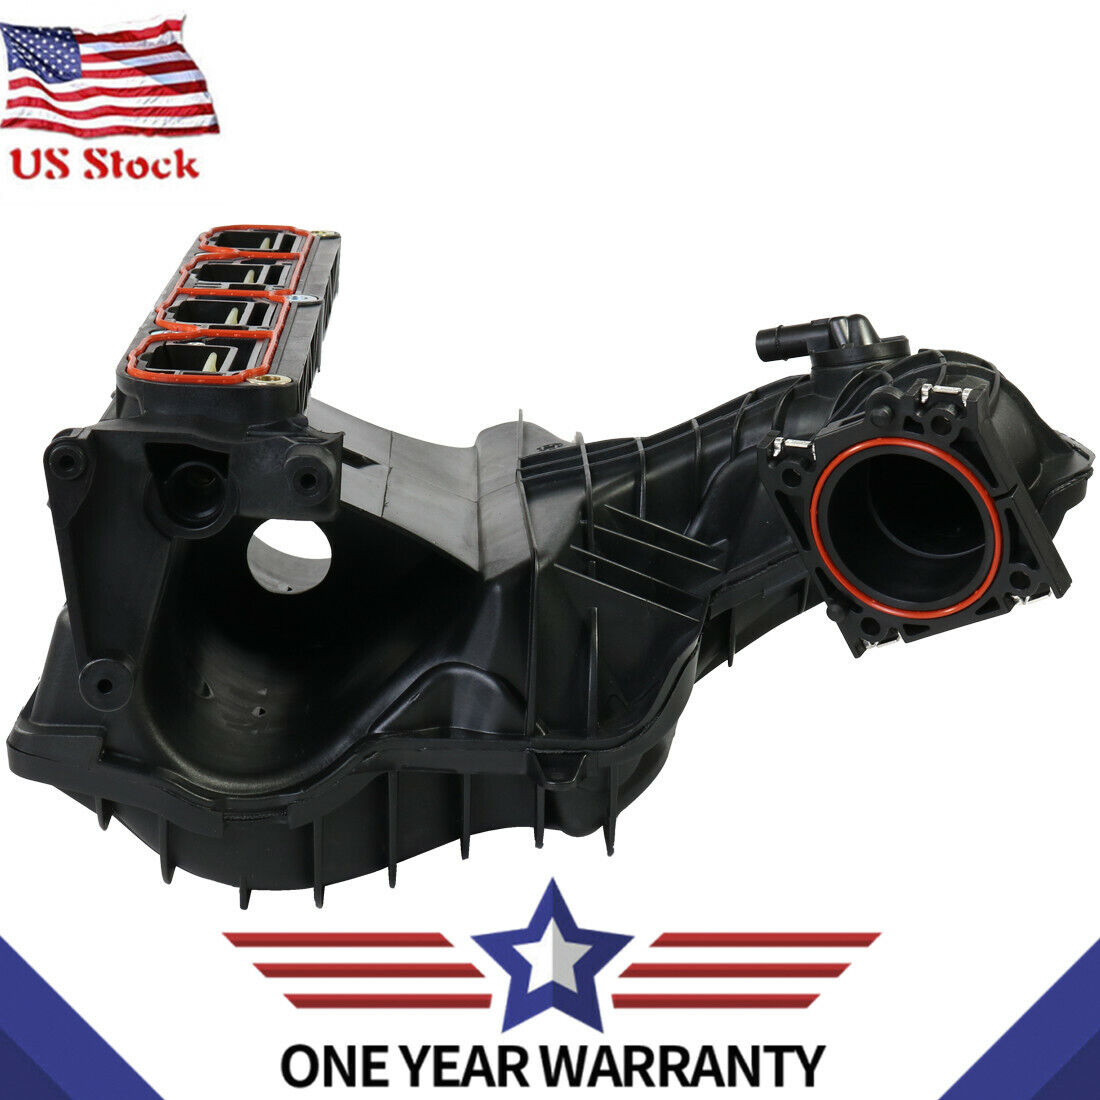 Intake Manifold Plenum For 07-17 Patriot Compass Caliber With Flow Control Valve